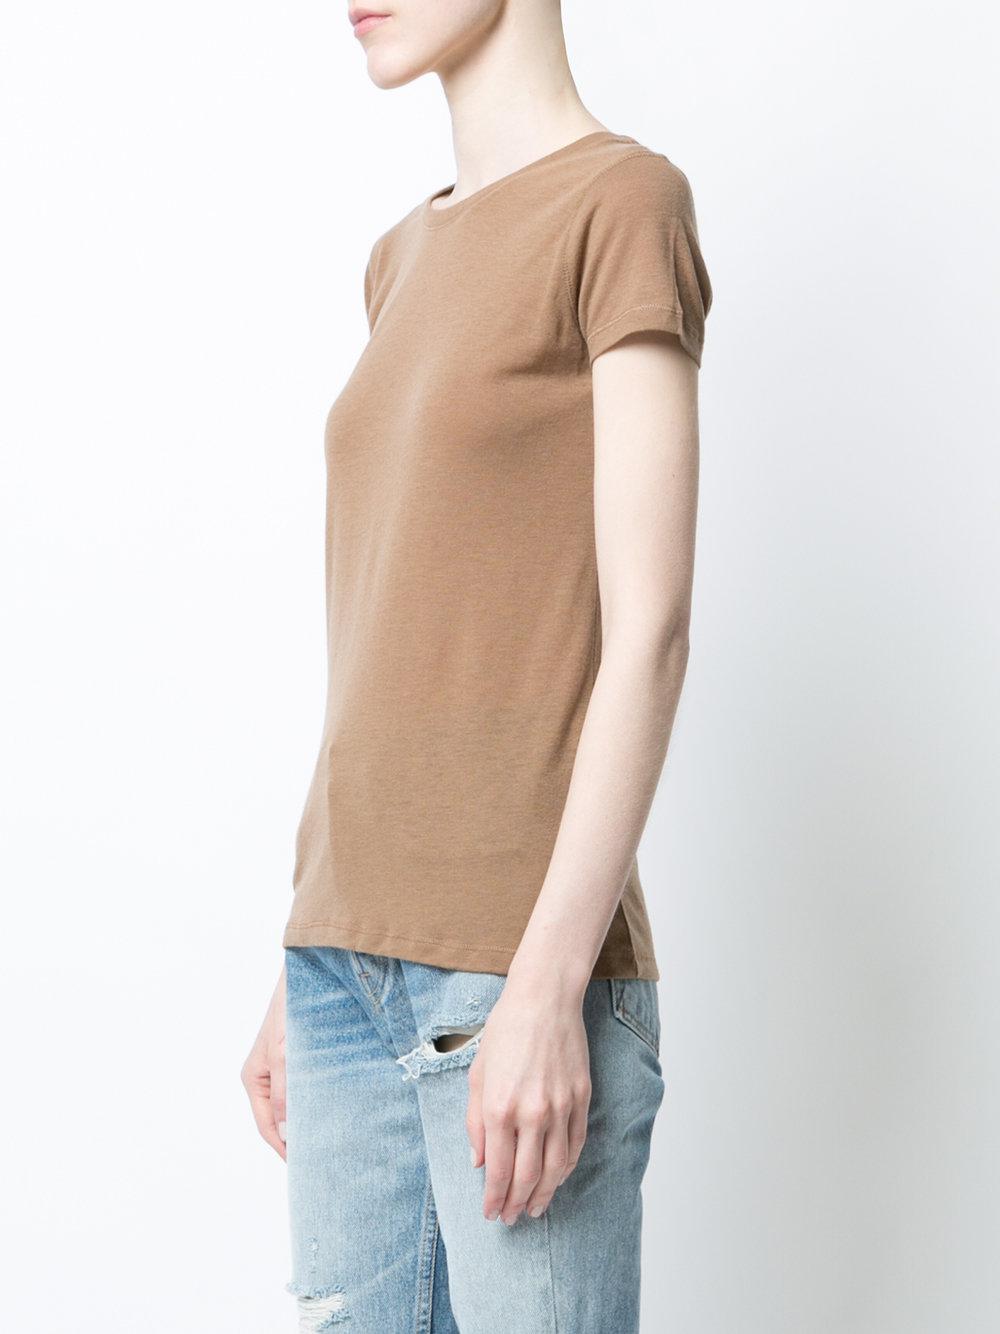 Lyst - Majestic Filatures Short Sleeve Knitted Top in Brown